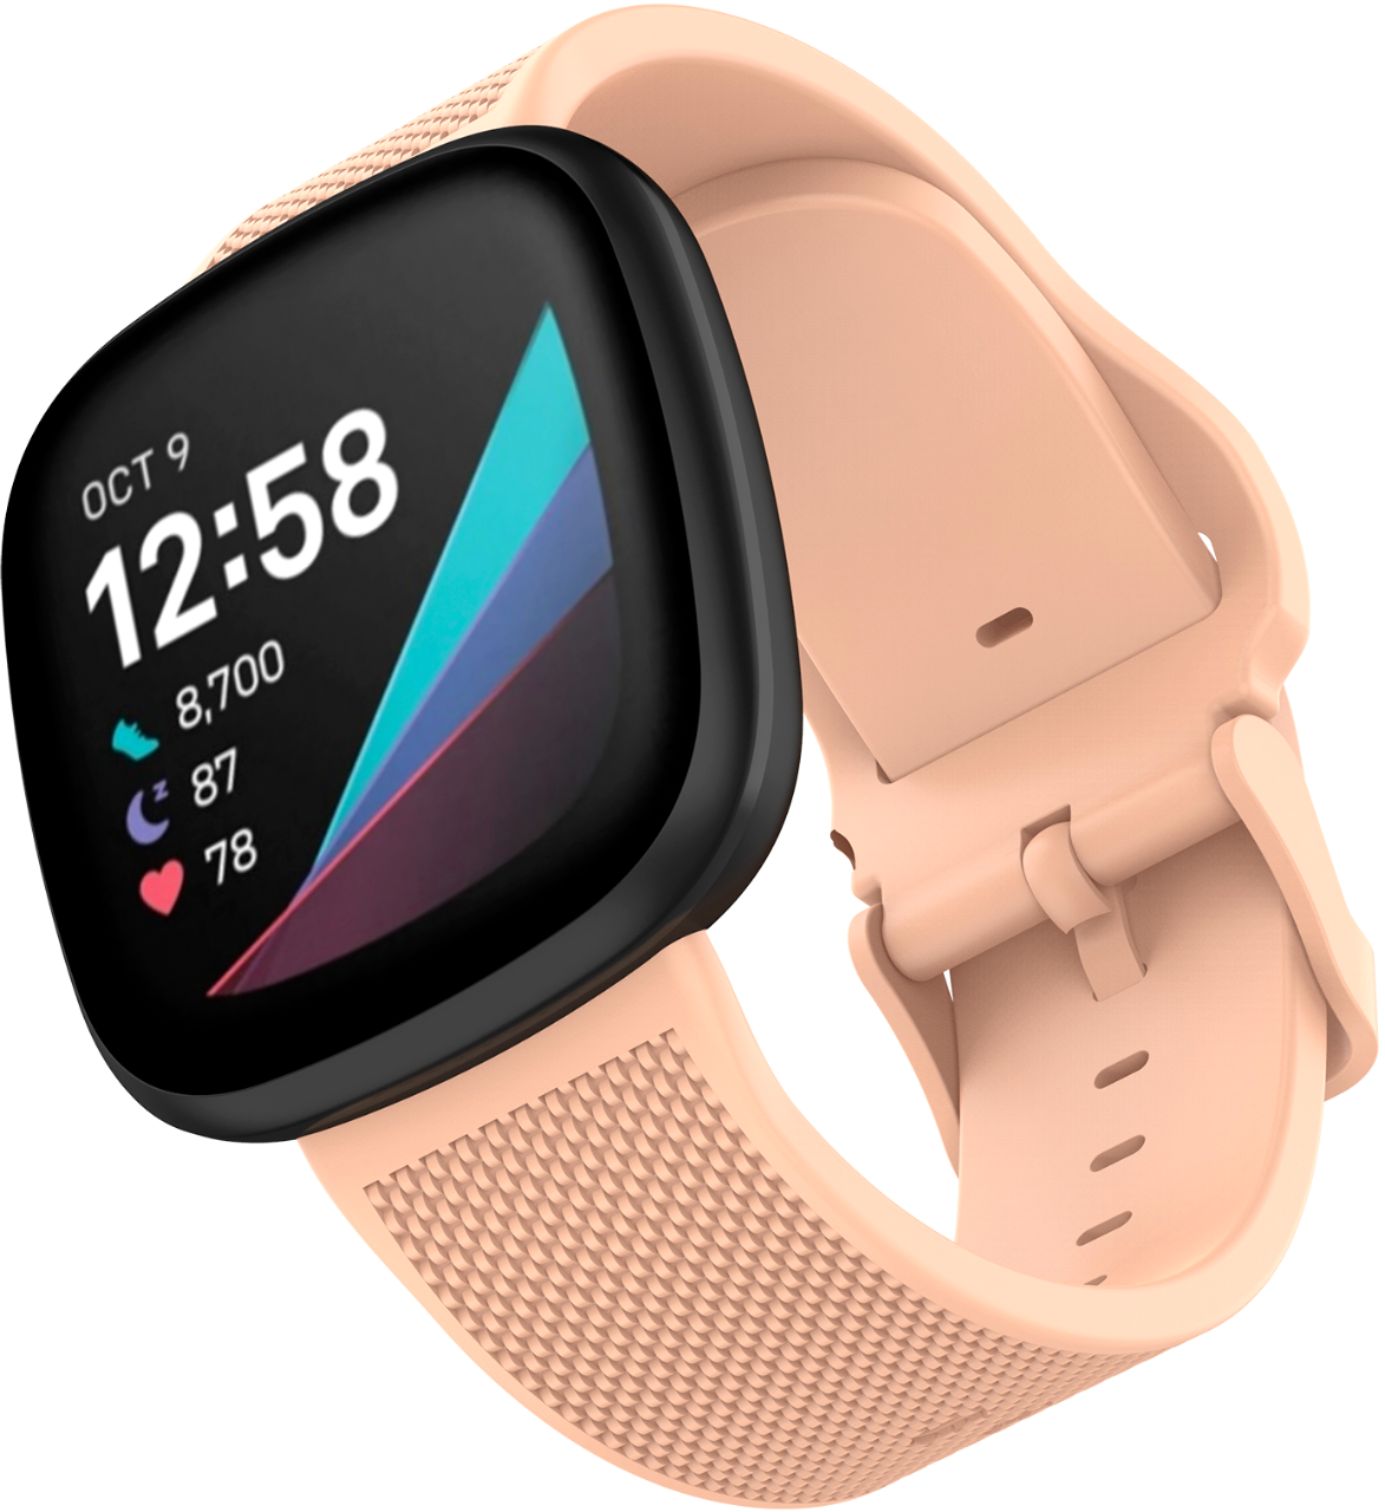 WITHit Fitbit Versa 3 & Fitbit Sense Silicone One size fits all Watch ...